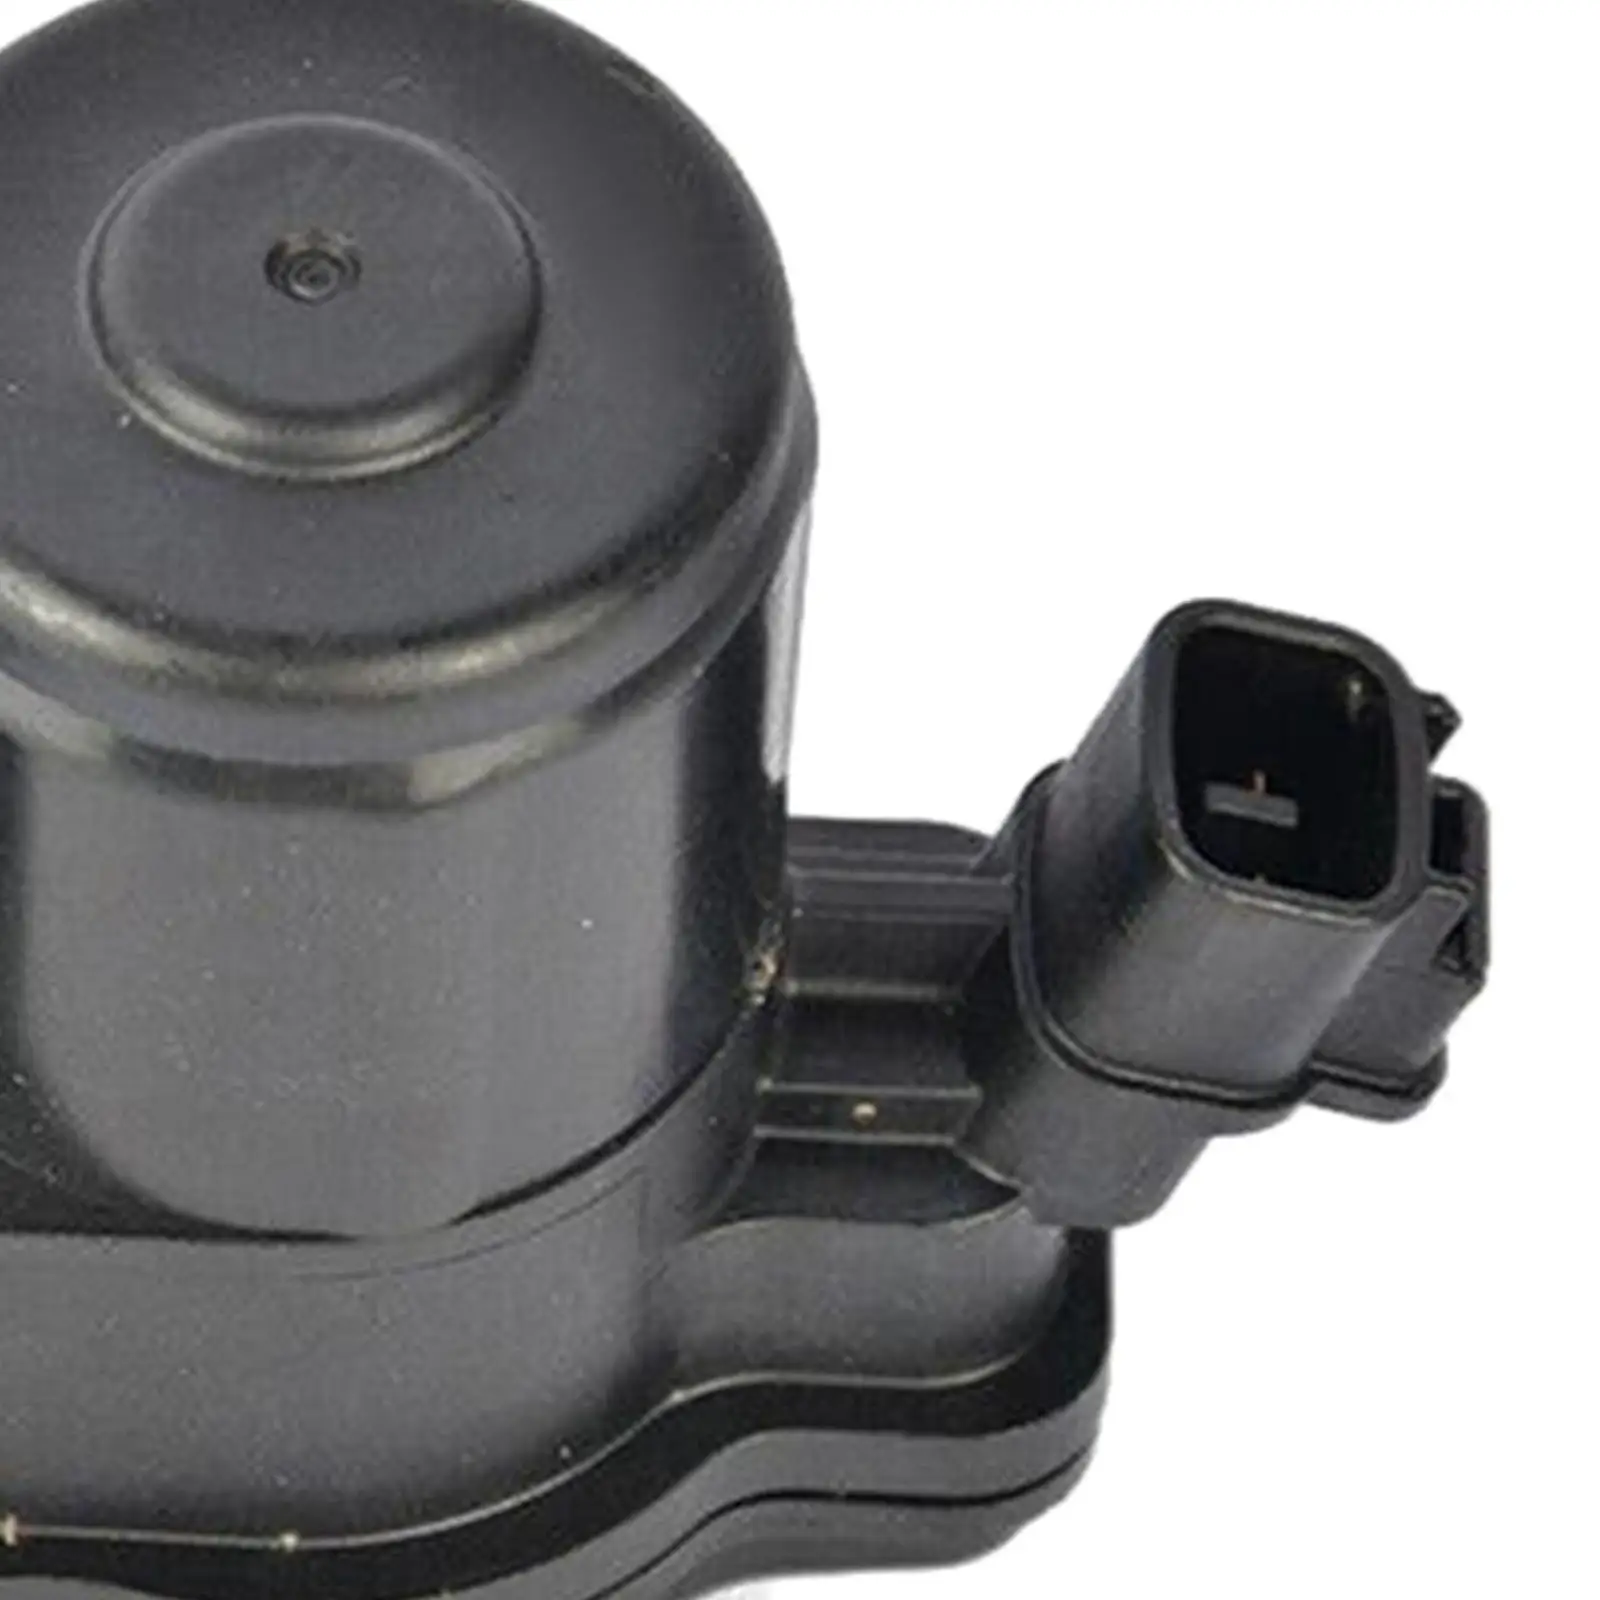 Parking Brake Actuator Assembly Replaces for Toyota Corolla Sedan for c-hr